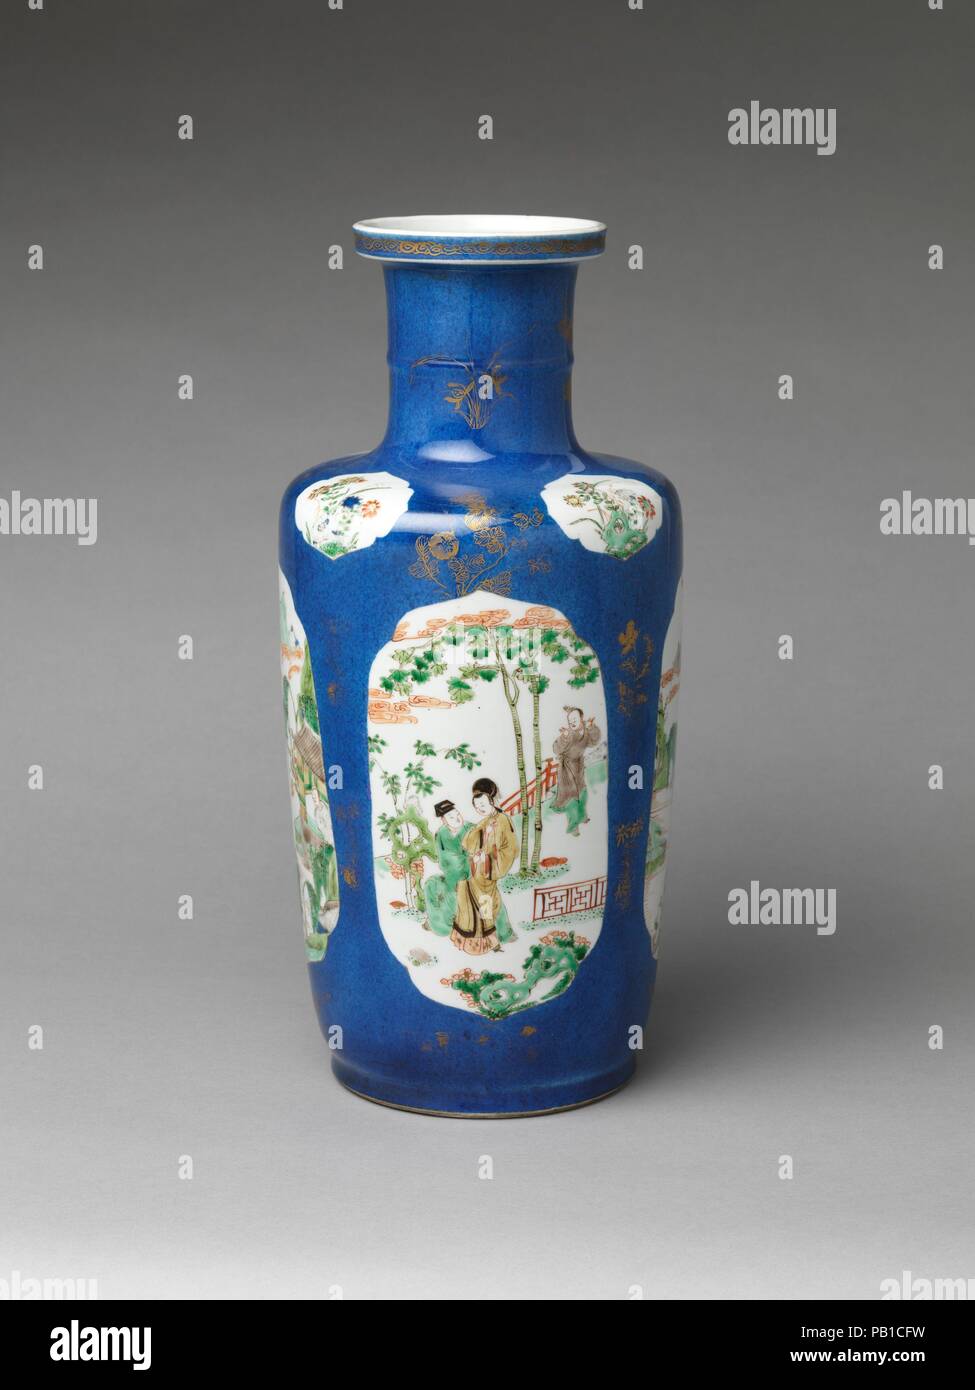 Vase with romantic scenes. Culture: China. Dimensions: H. 17 in. (43.2 cm). Date: early 18th century.  The figures on this vase were inspired by illustrations of historical characters in woodblock-printed plays and novels. Such publications became popular in the seventeenth century and influenced porcelain design and other decorative arts. Museum: Metropolitan Museum of Art, New York, USA. Stock Photo